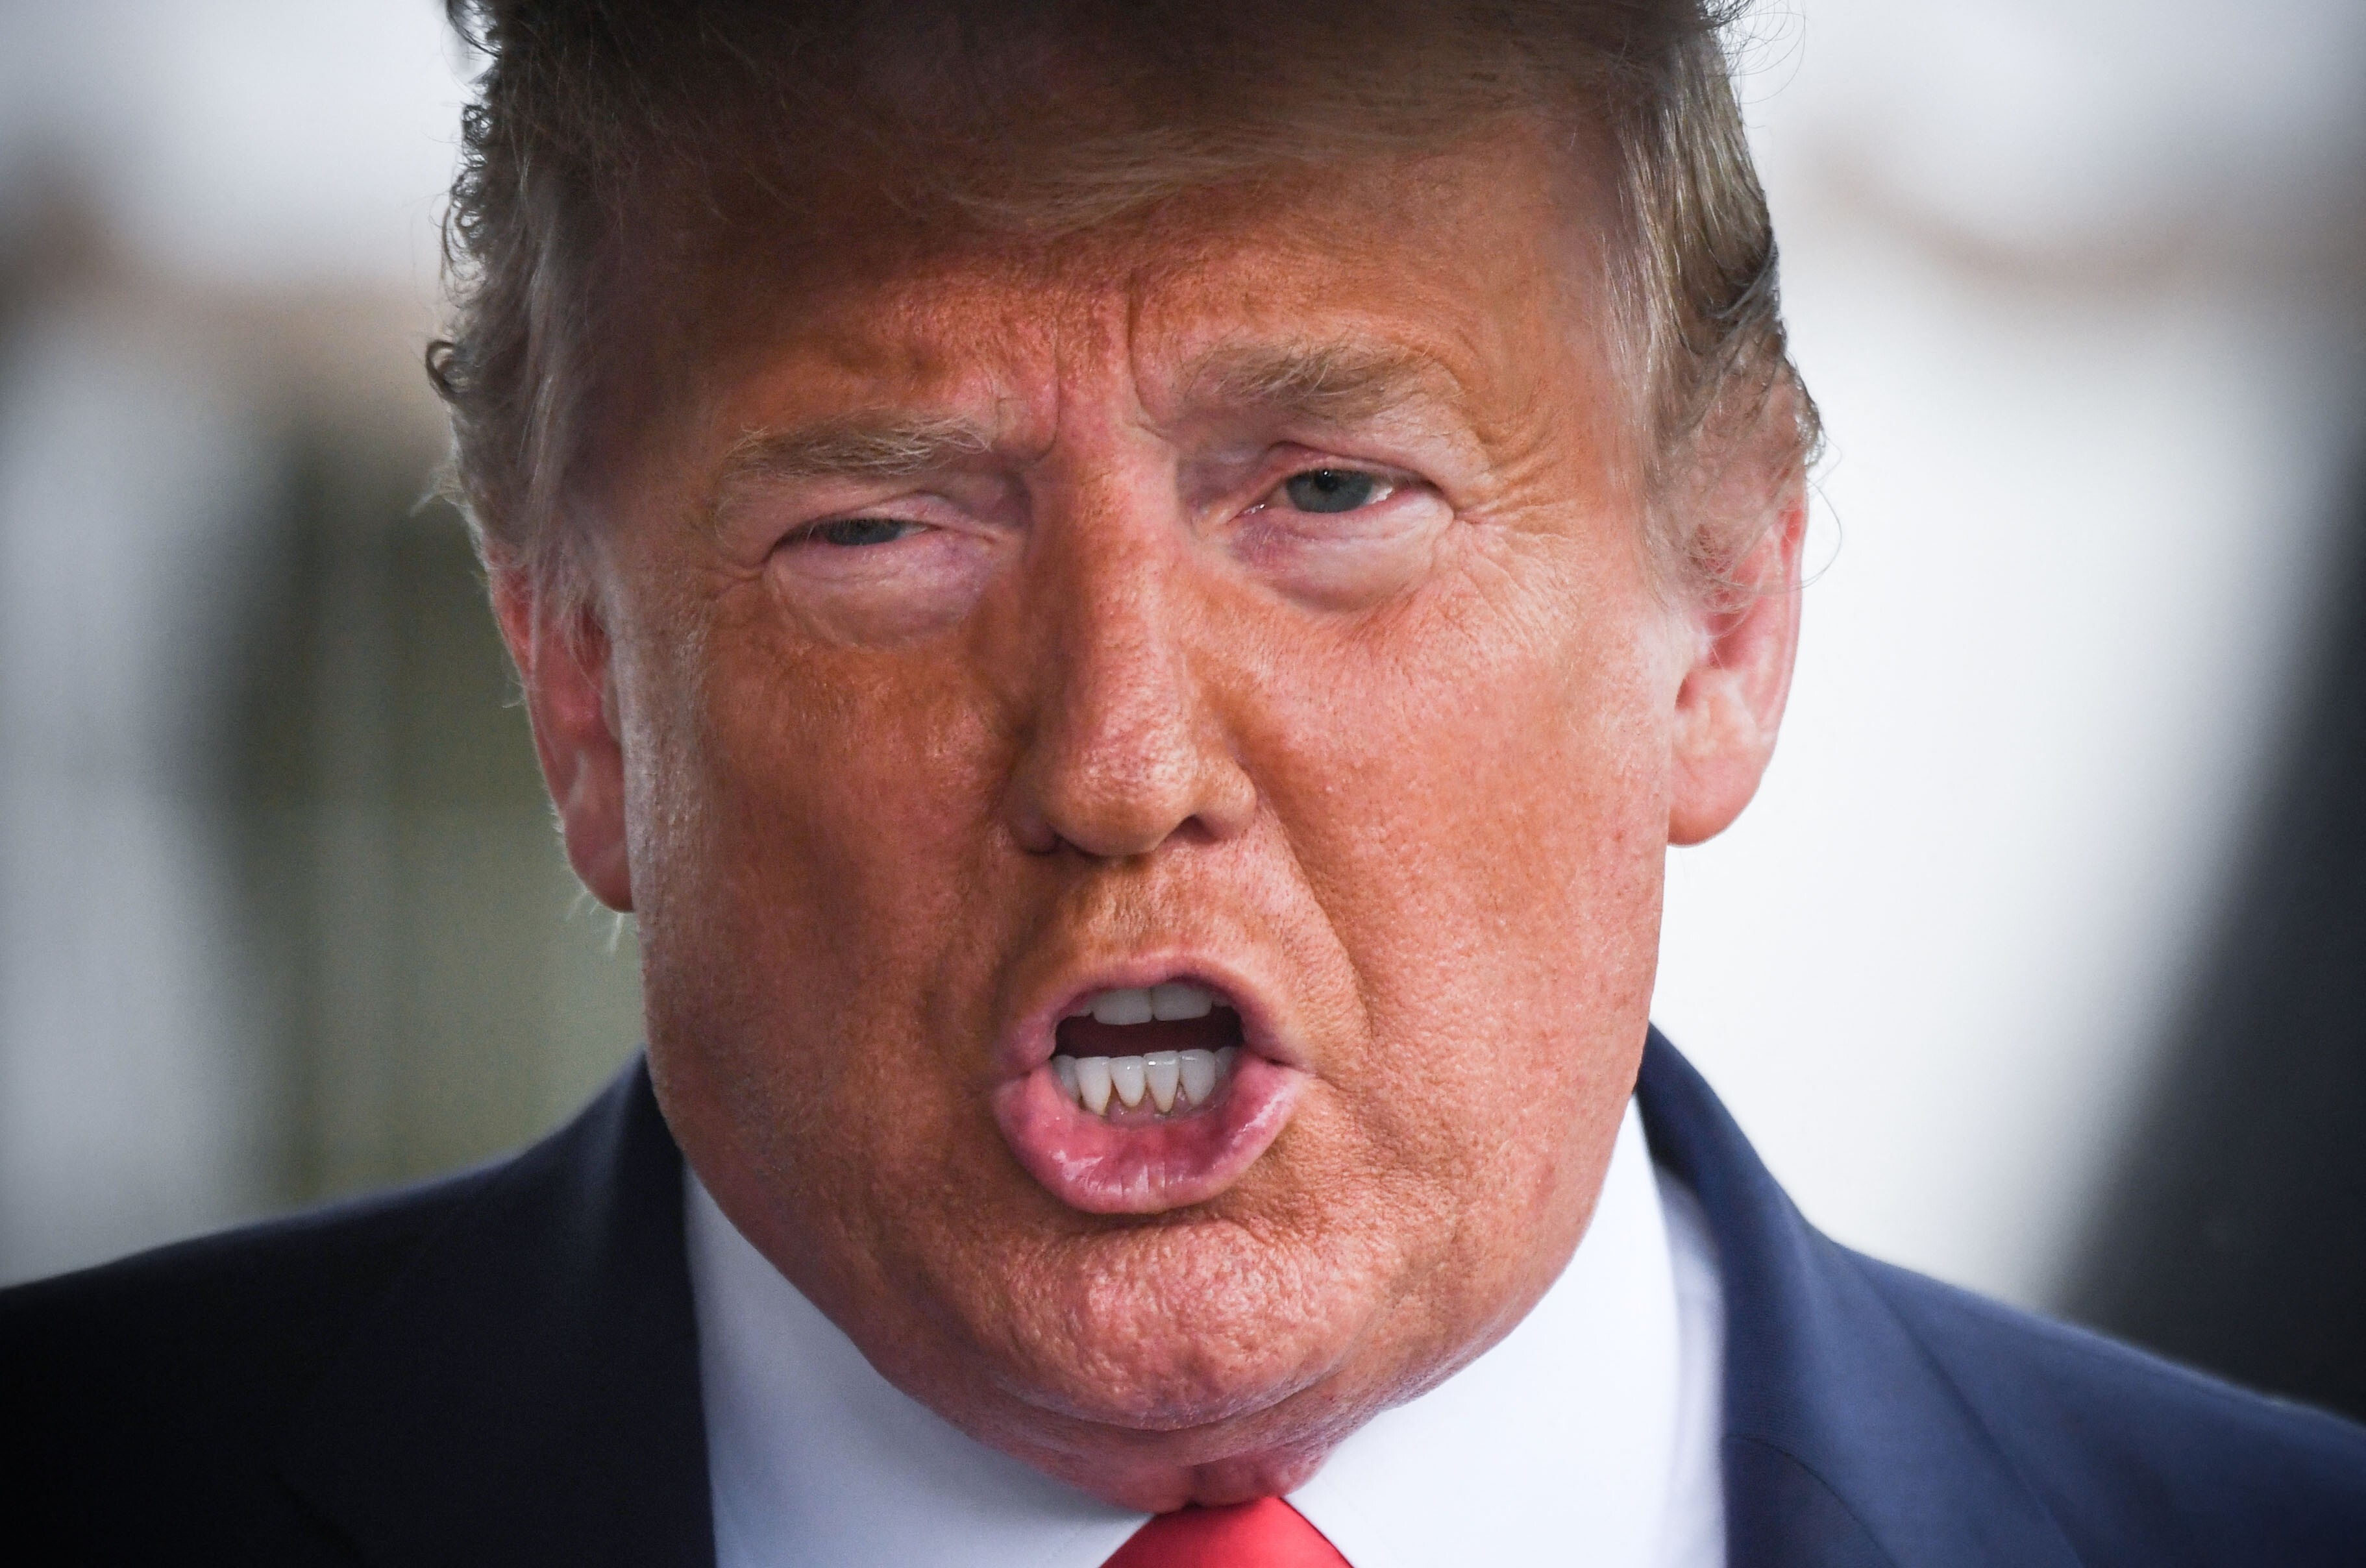 US President Donald Trump speaks to the press before departing the White House in June 2020. Photo: AFP